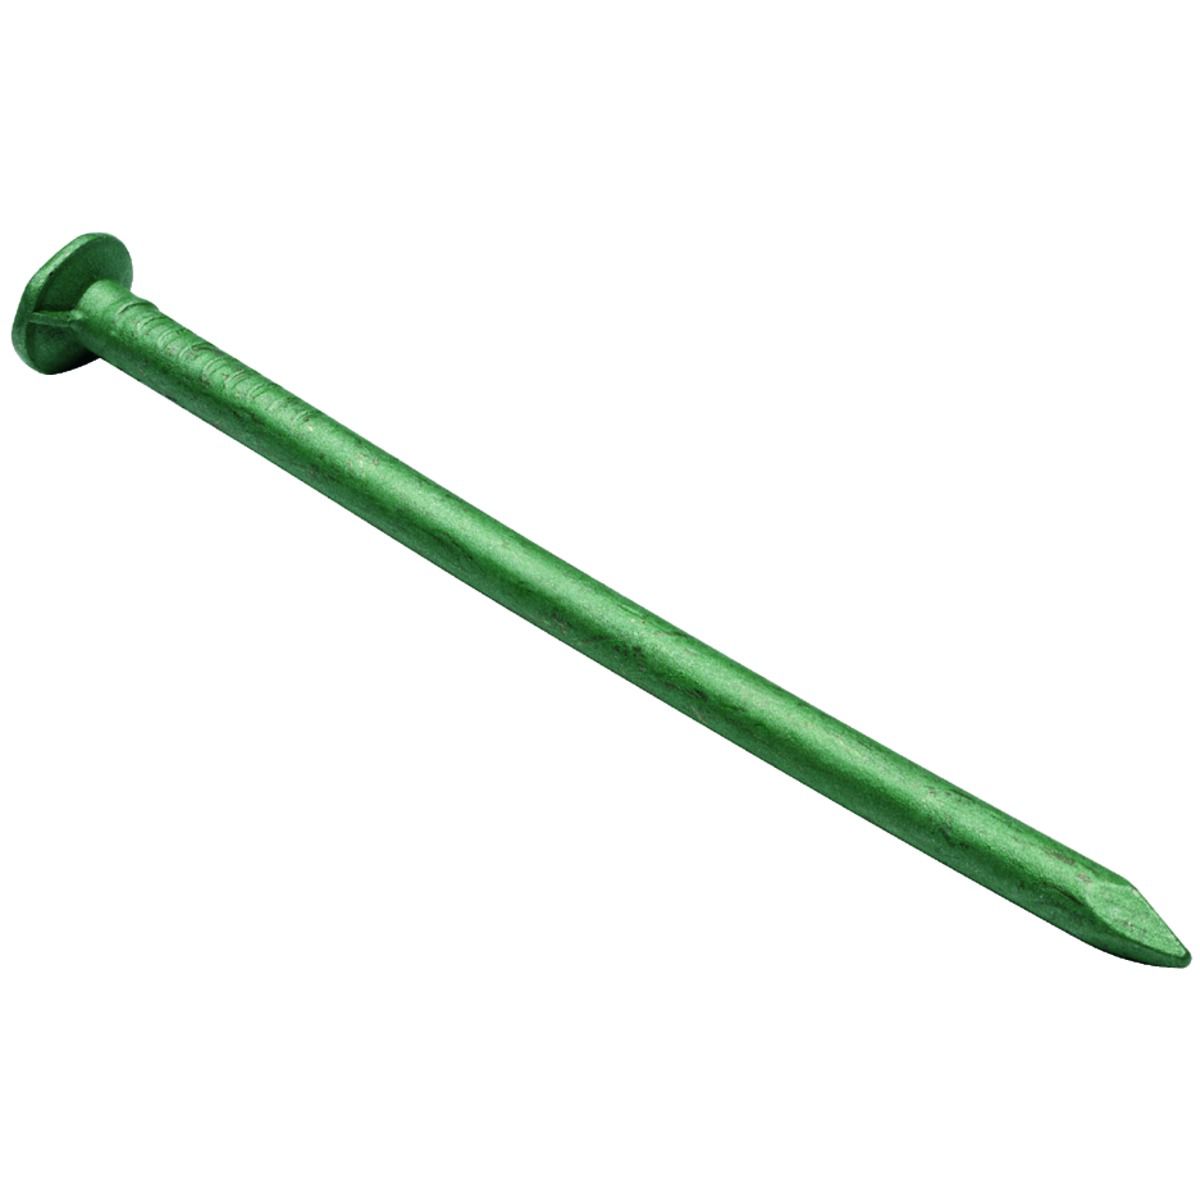 Image of Wickes 150mm Exterior Nails - 1kg